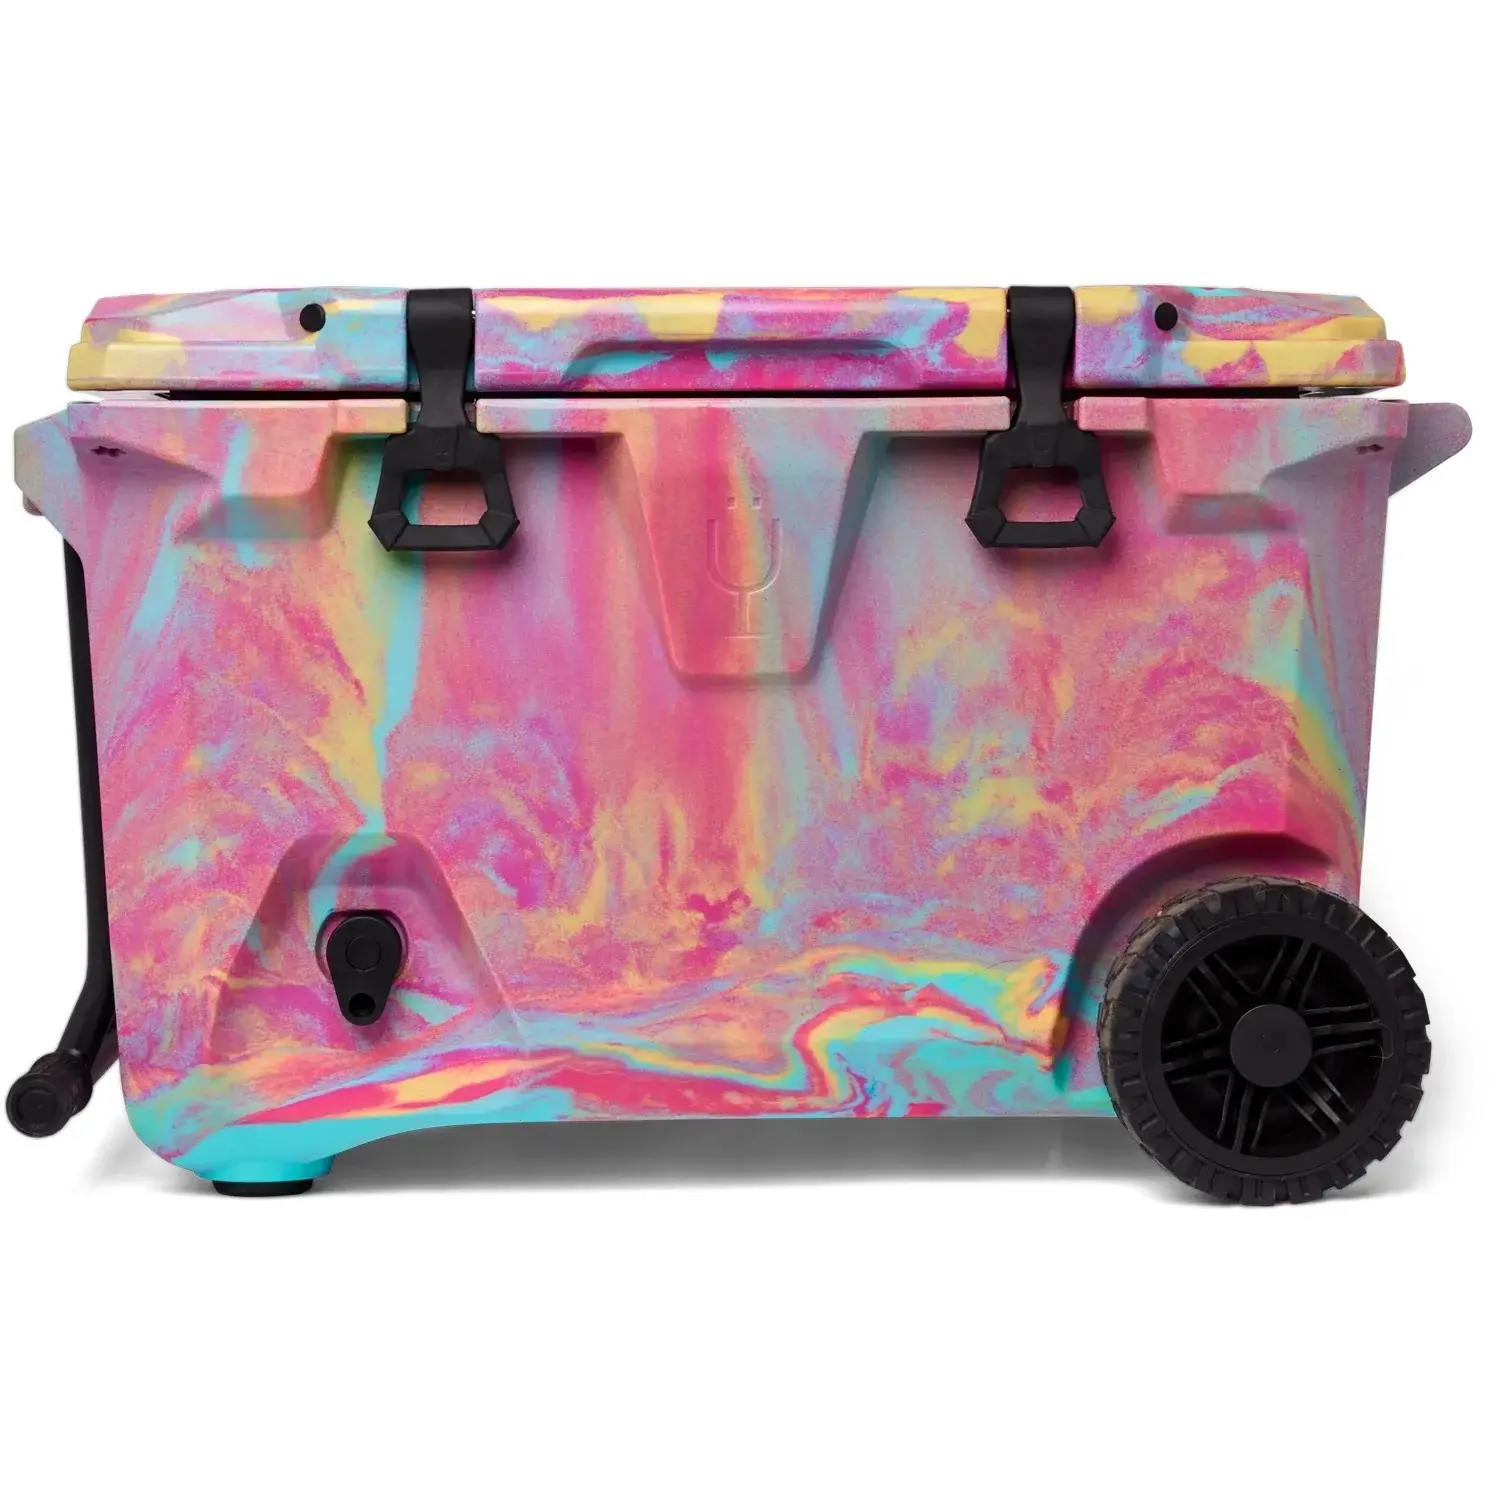 NEW BRUMATE BACKTAP TAILGATE PARTY BACKPACK DRINK COOLER - RAINBOW SWIRL